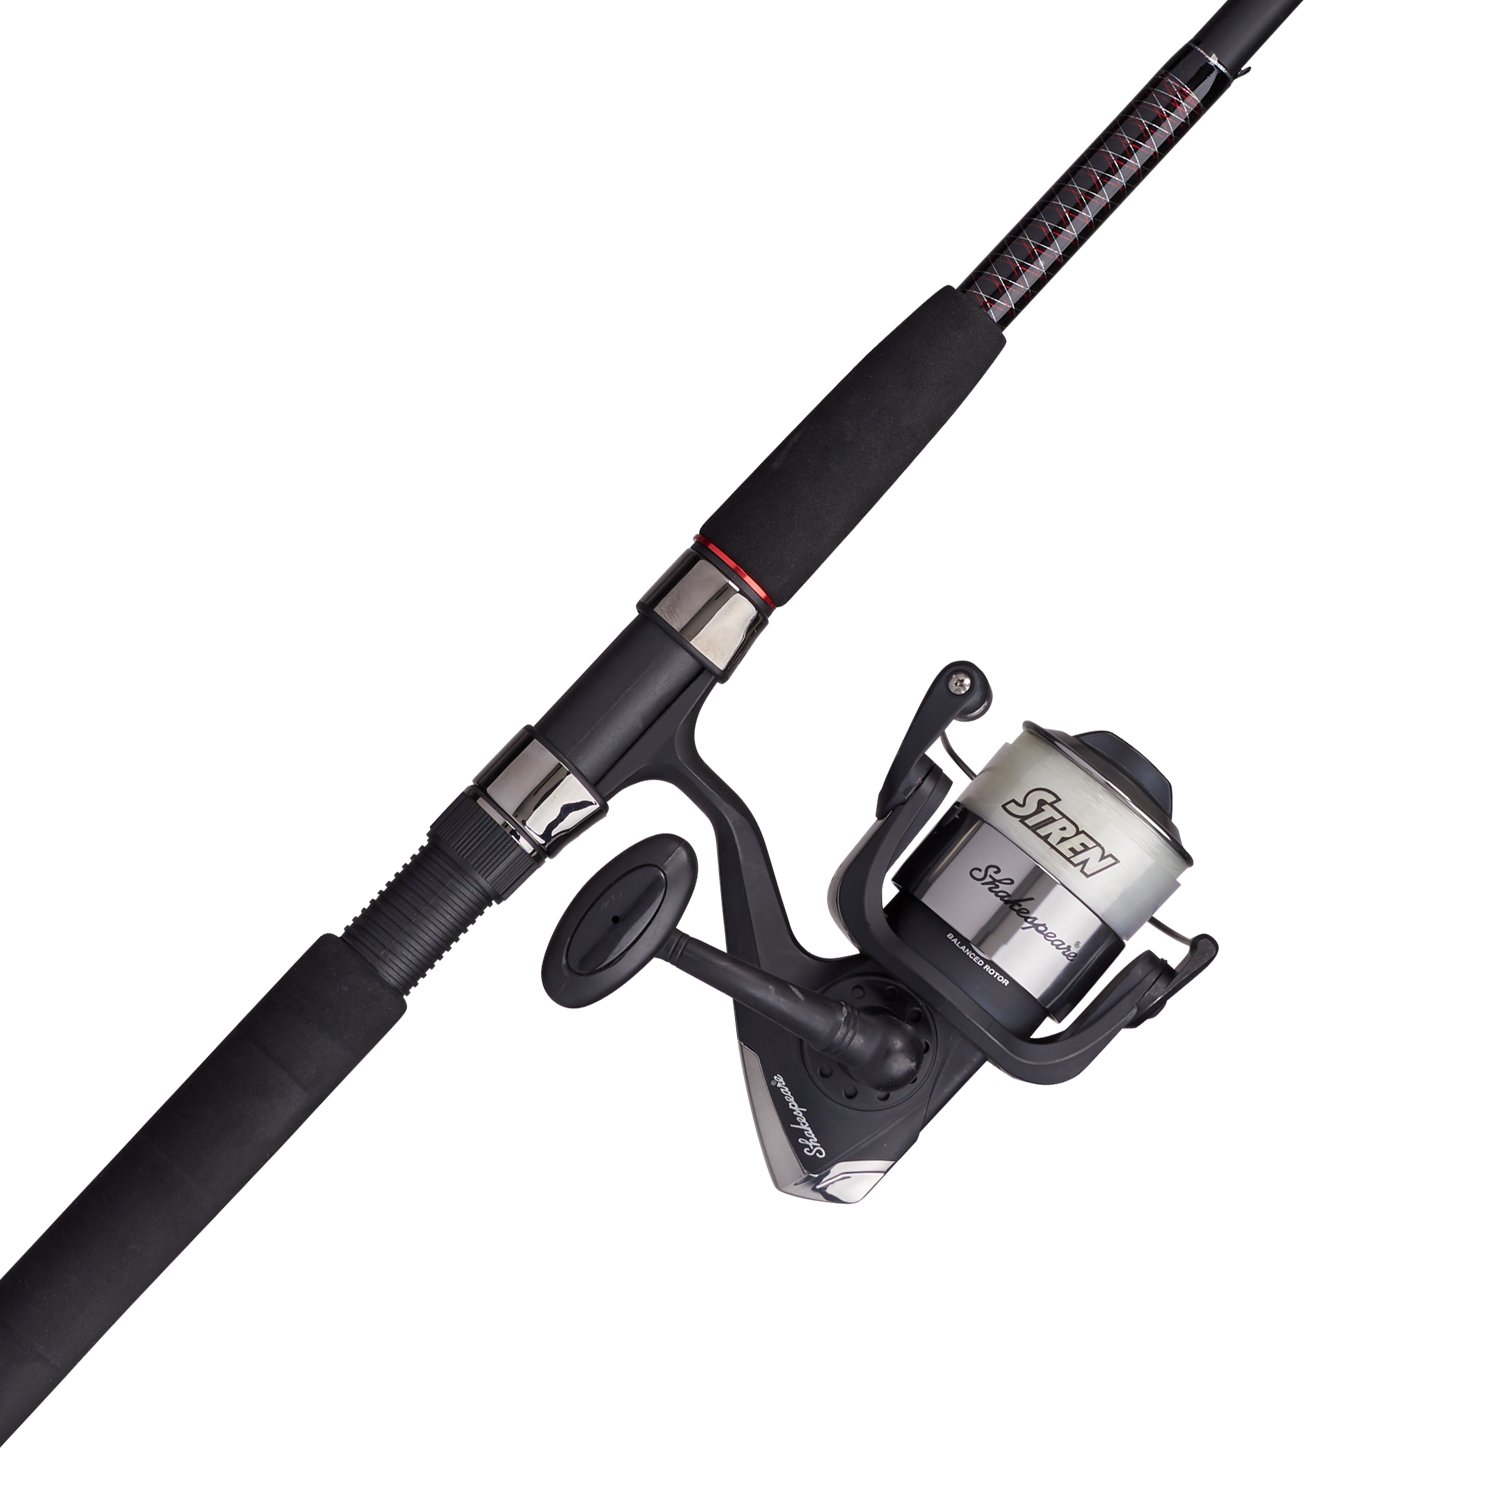 https://academy.scene7.com/is/image/academy//fishing-rod---reel-combos/ugly-stik-catch-ugly-fish-surf-pier-spinning-combo-uscufspsurfpier-/095a658885c64c918b2b9384cbb3f0ab